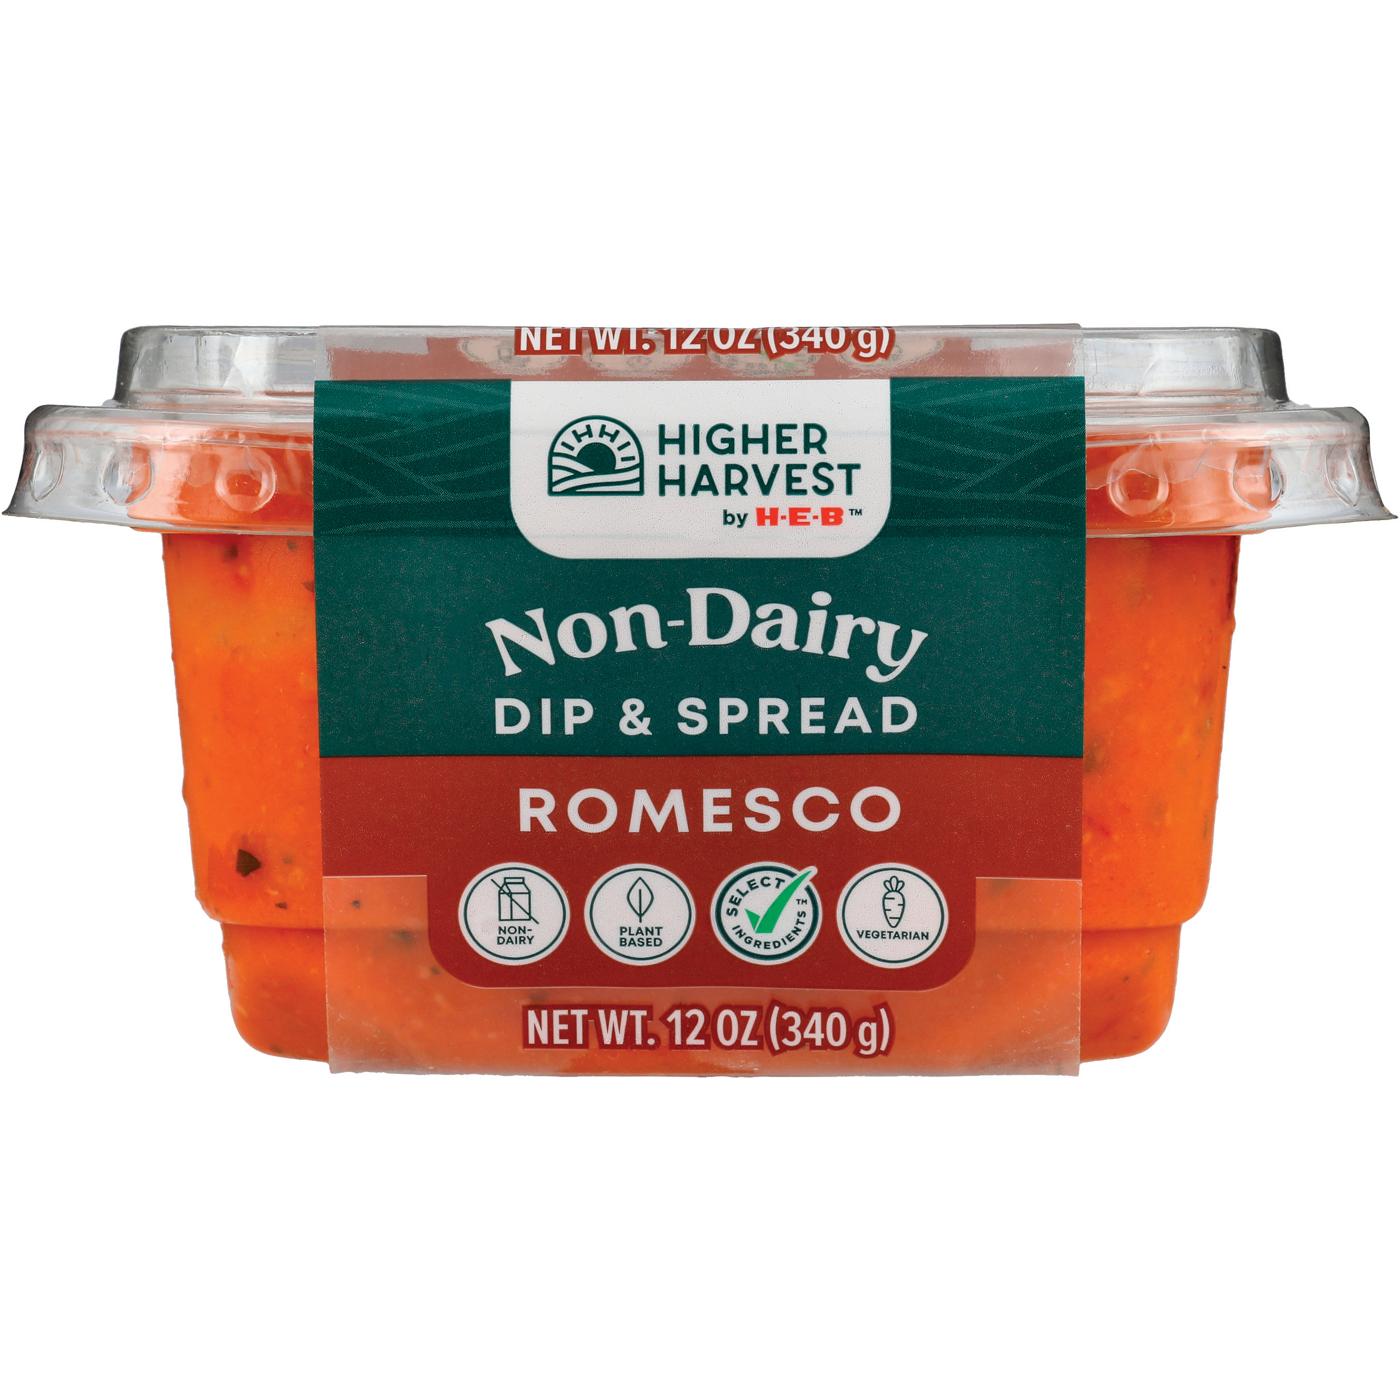 Higher Harvest by H-E-B Non-Dairy Dip & Spread - Romesco; image 1 of 3